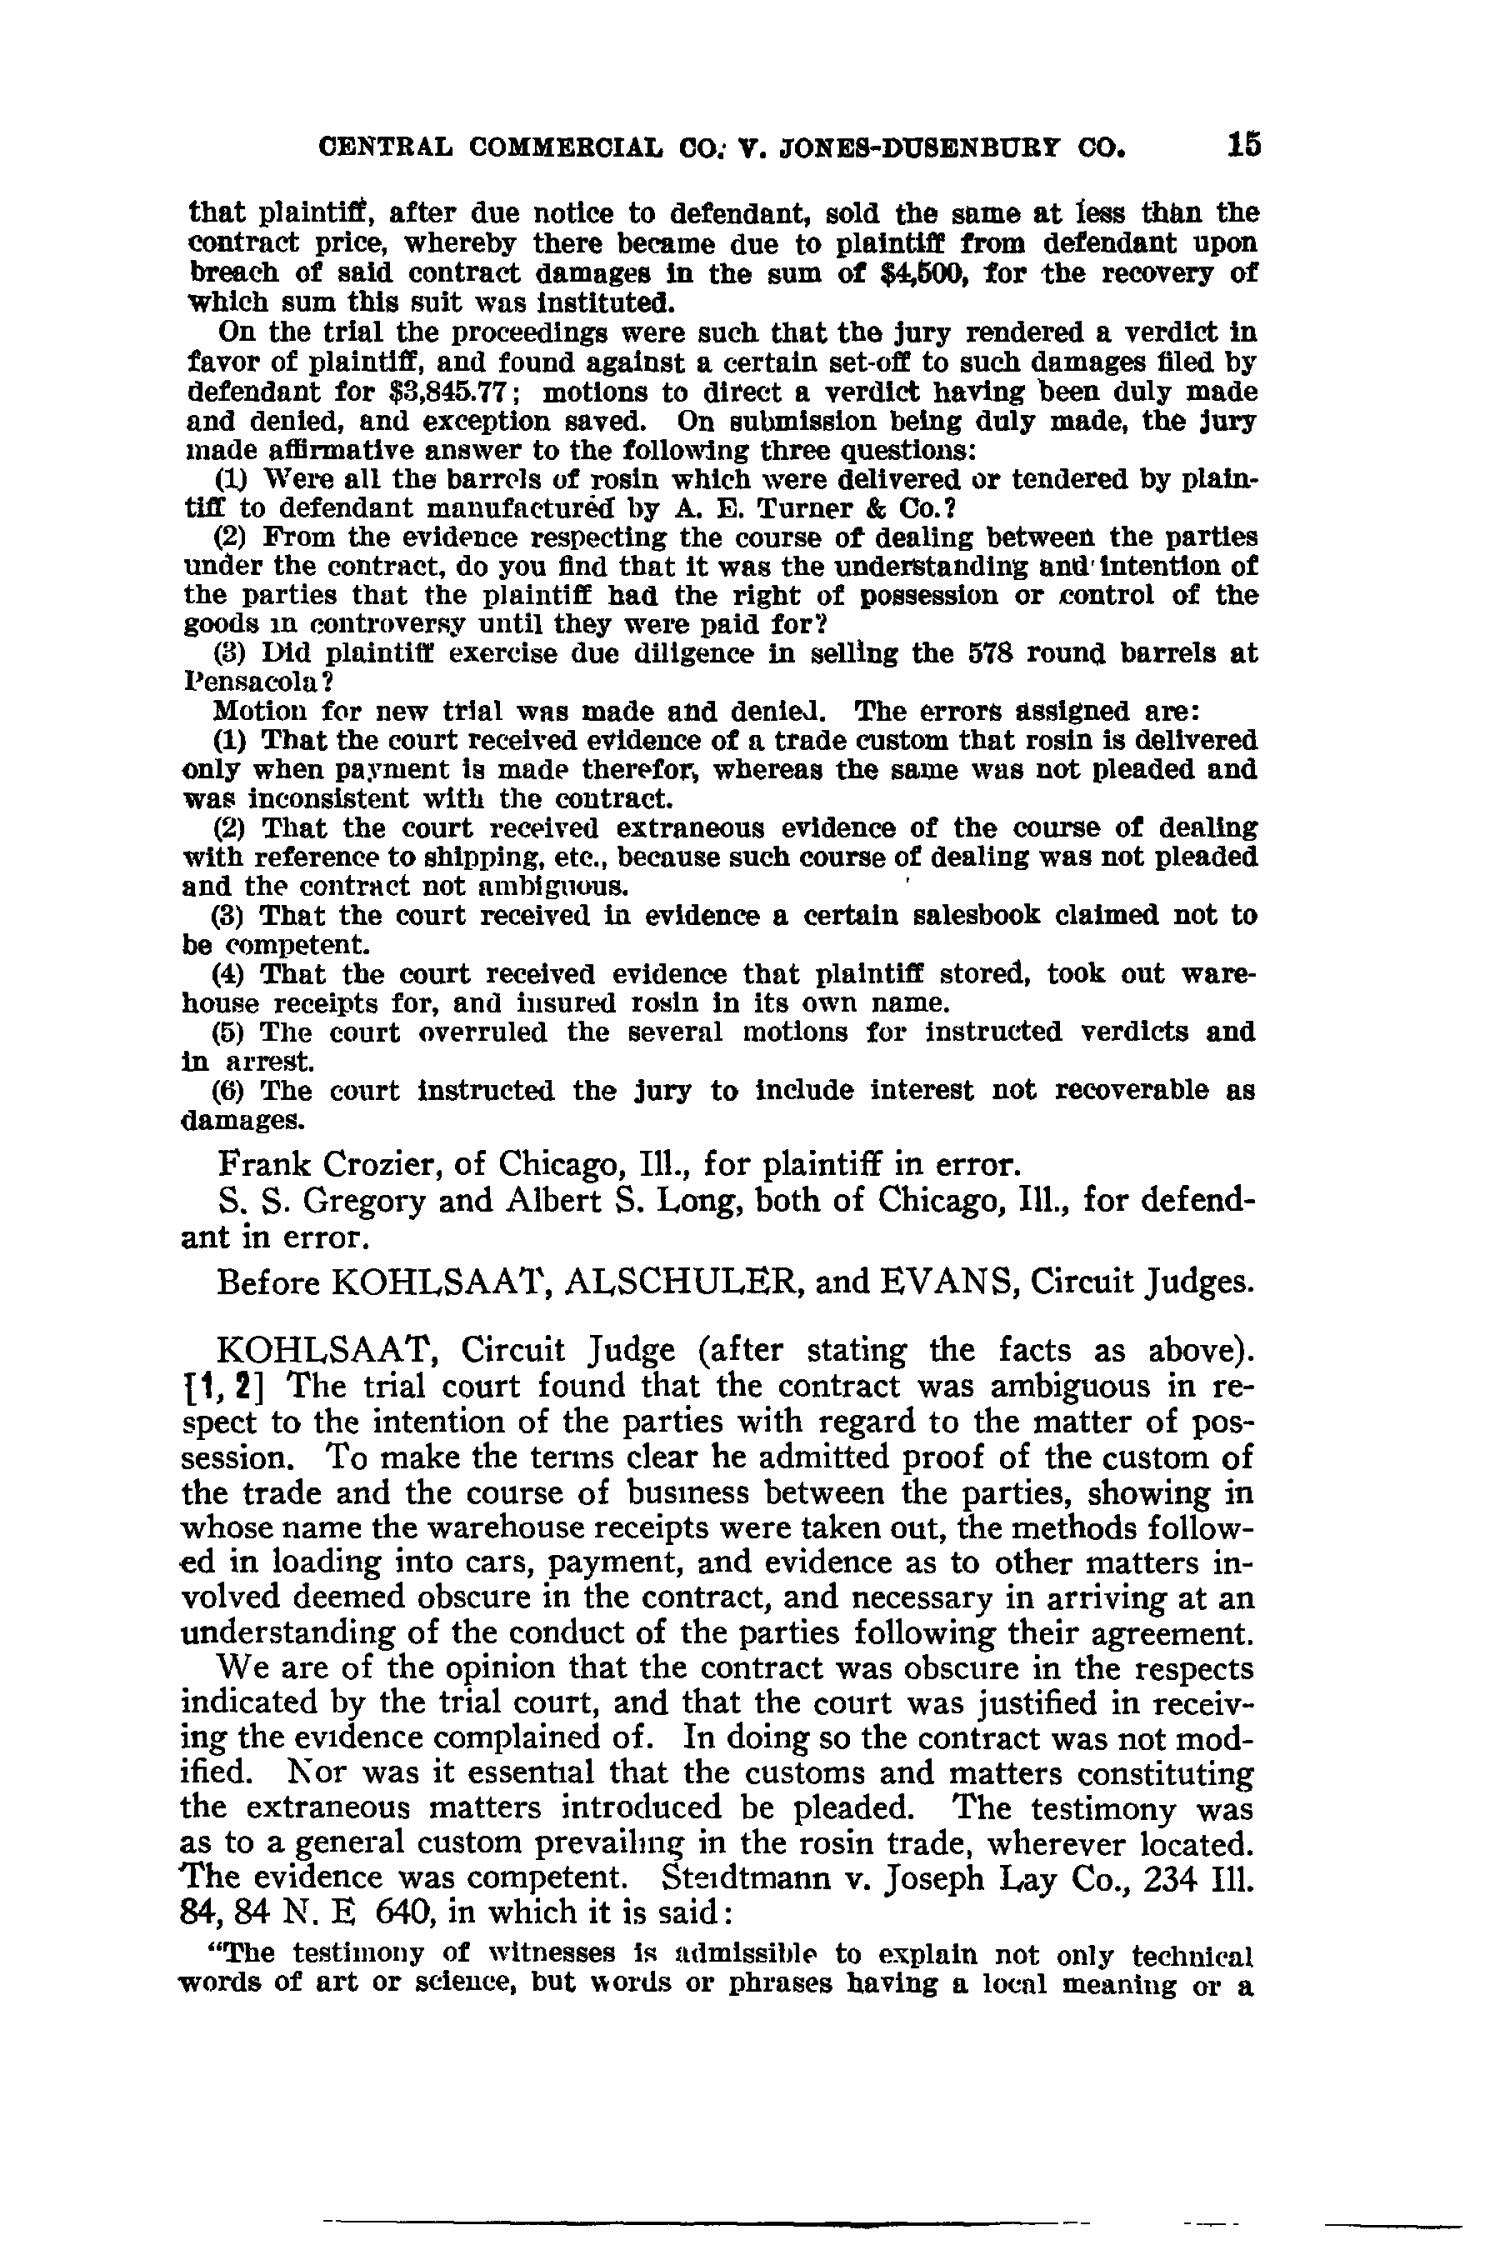 The Federal Reporter with Key-Number Annotations, Volume 251: Cases Argued and Determined in the Circuit Courts of Appeals and District Courts of the United States, October, 1918.
                                                
                                                    15
                                                